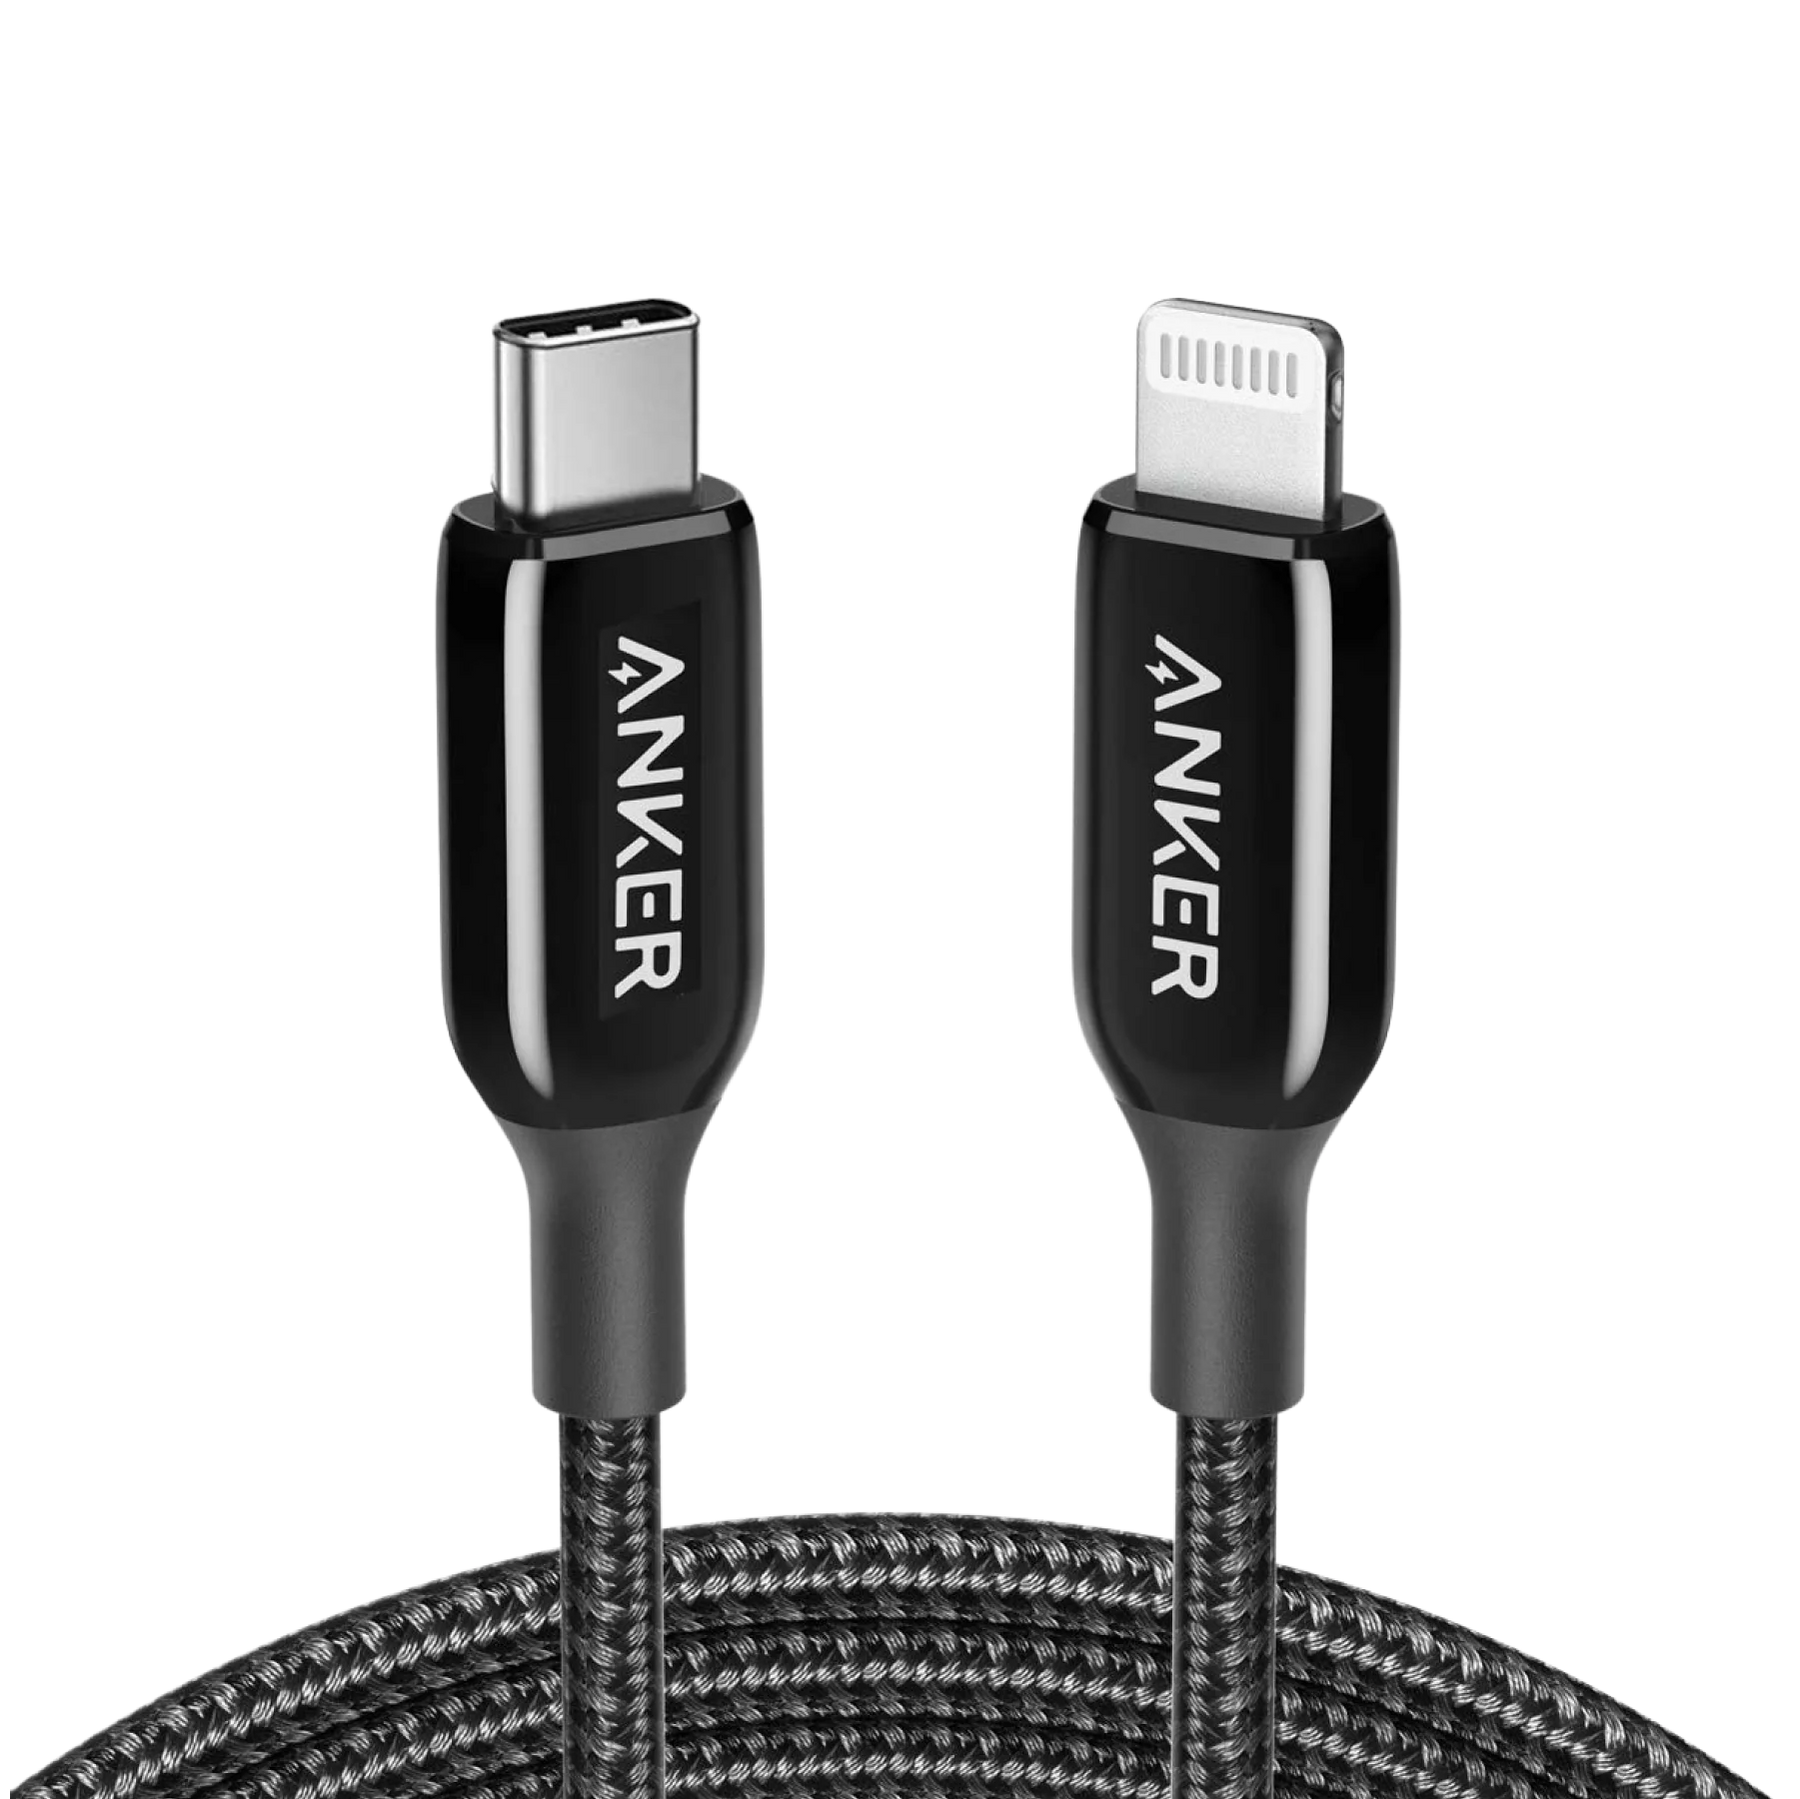 Anker PowerLine+ III USB-C Cable with Lightning Connector 3ft